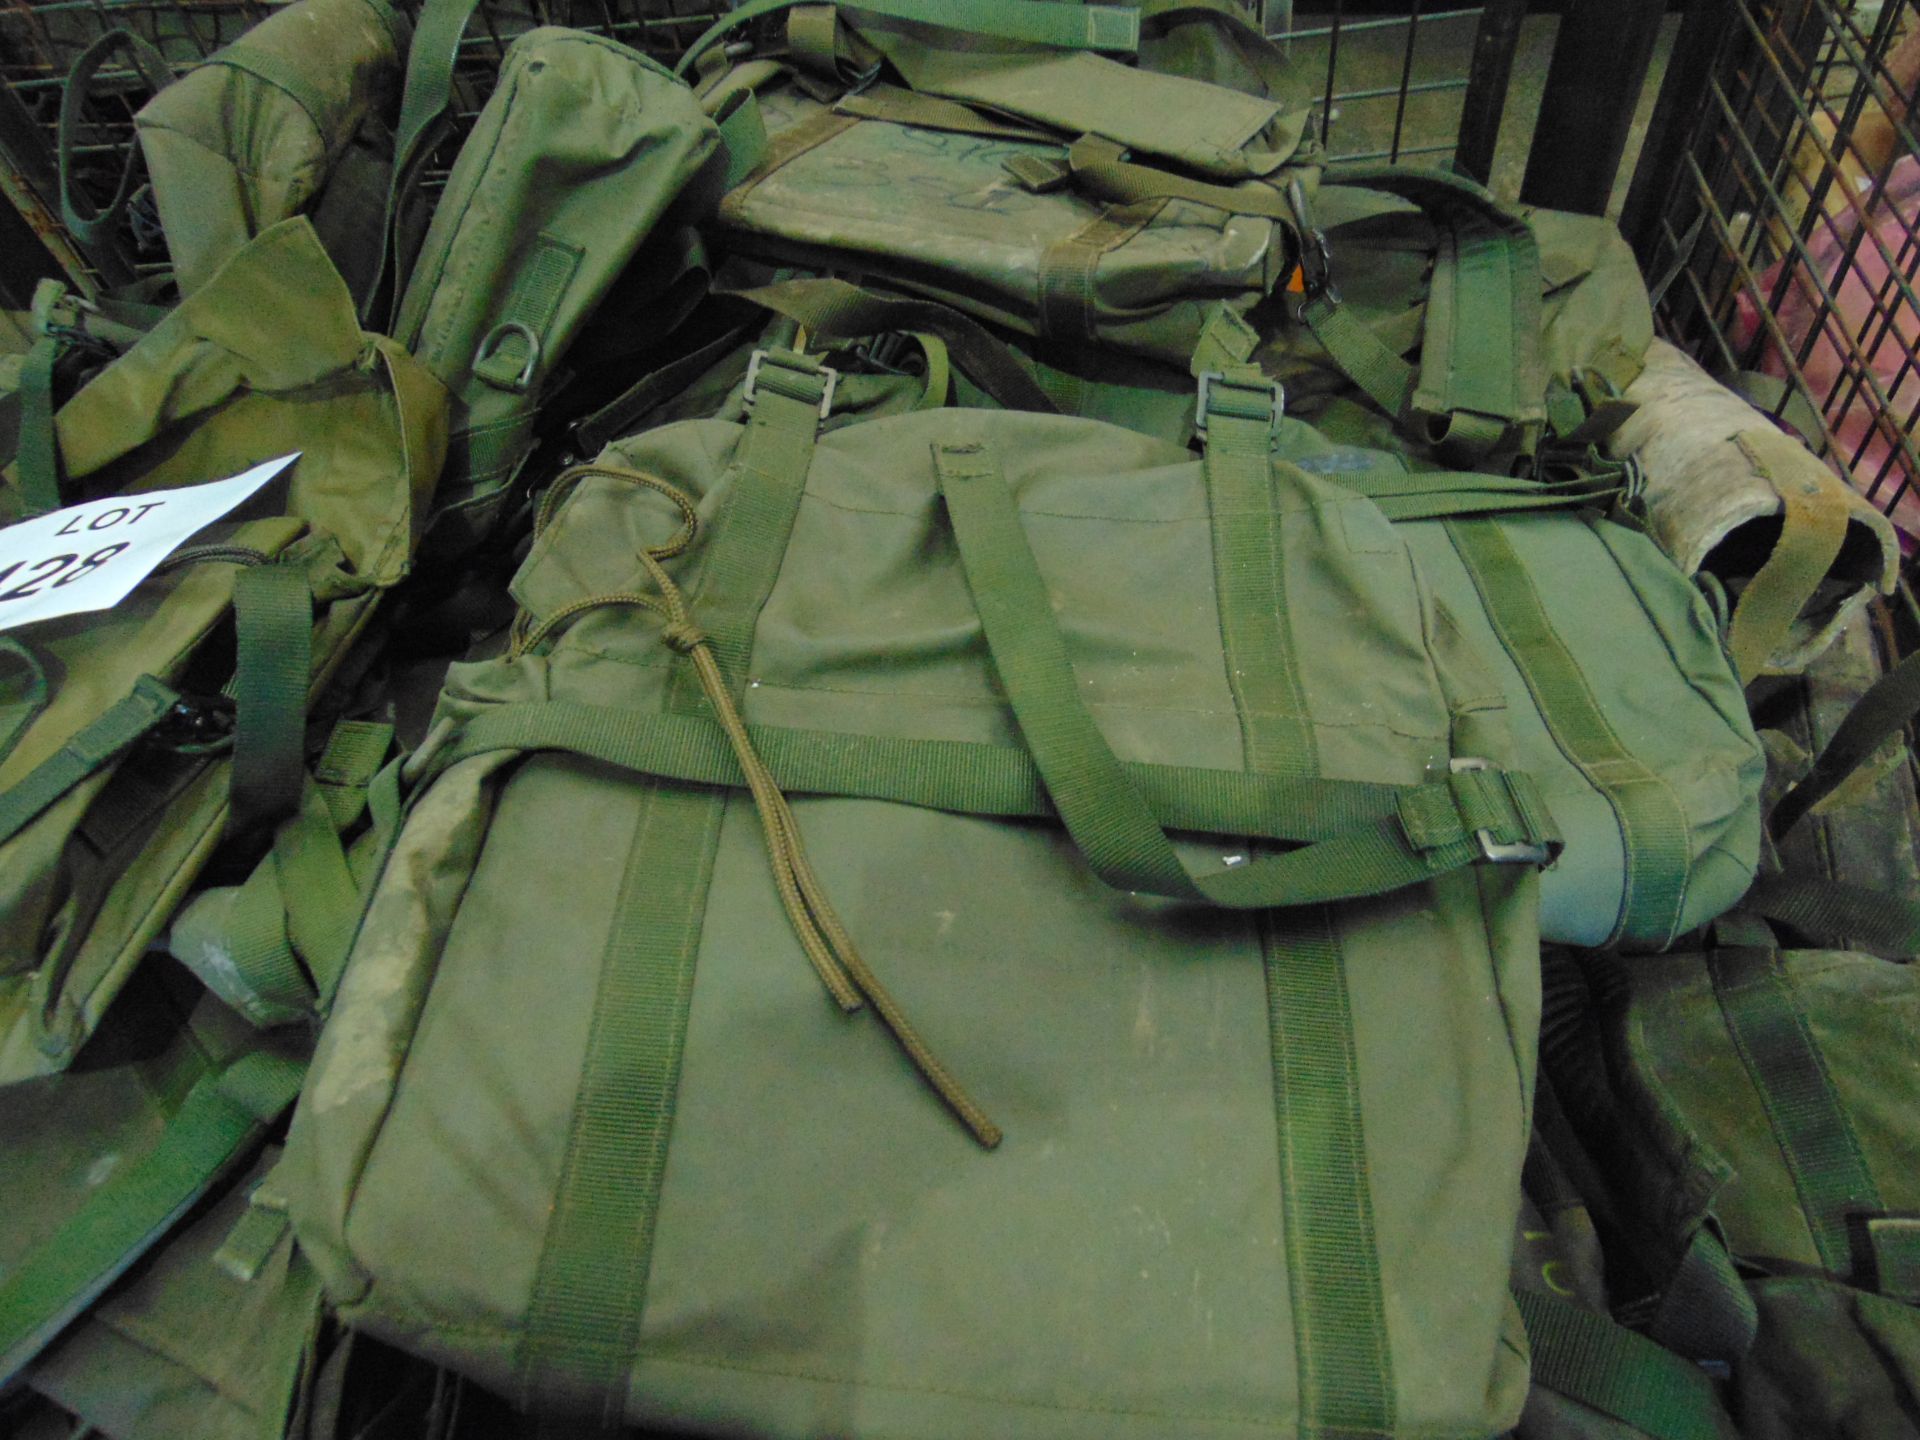 1X STILLAGE OF COMMS BAGS, ANTENA COVERS, ETC - Image 9 of 9